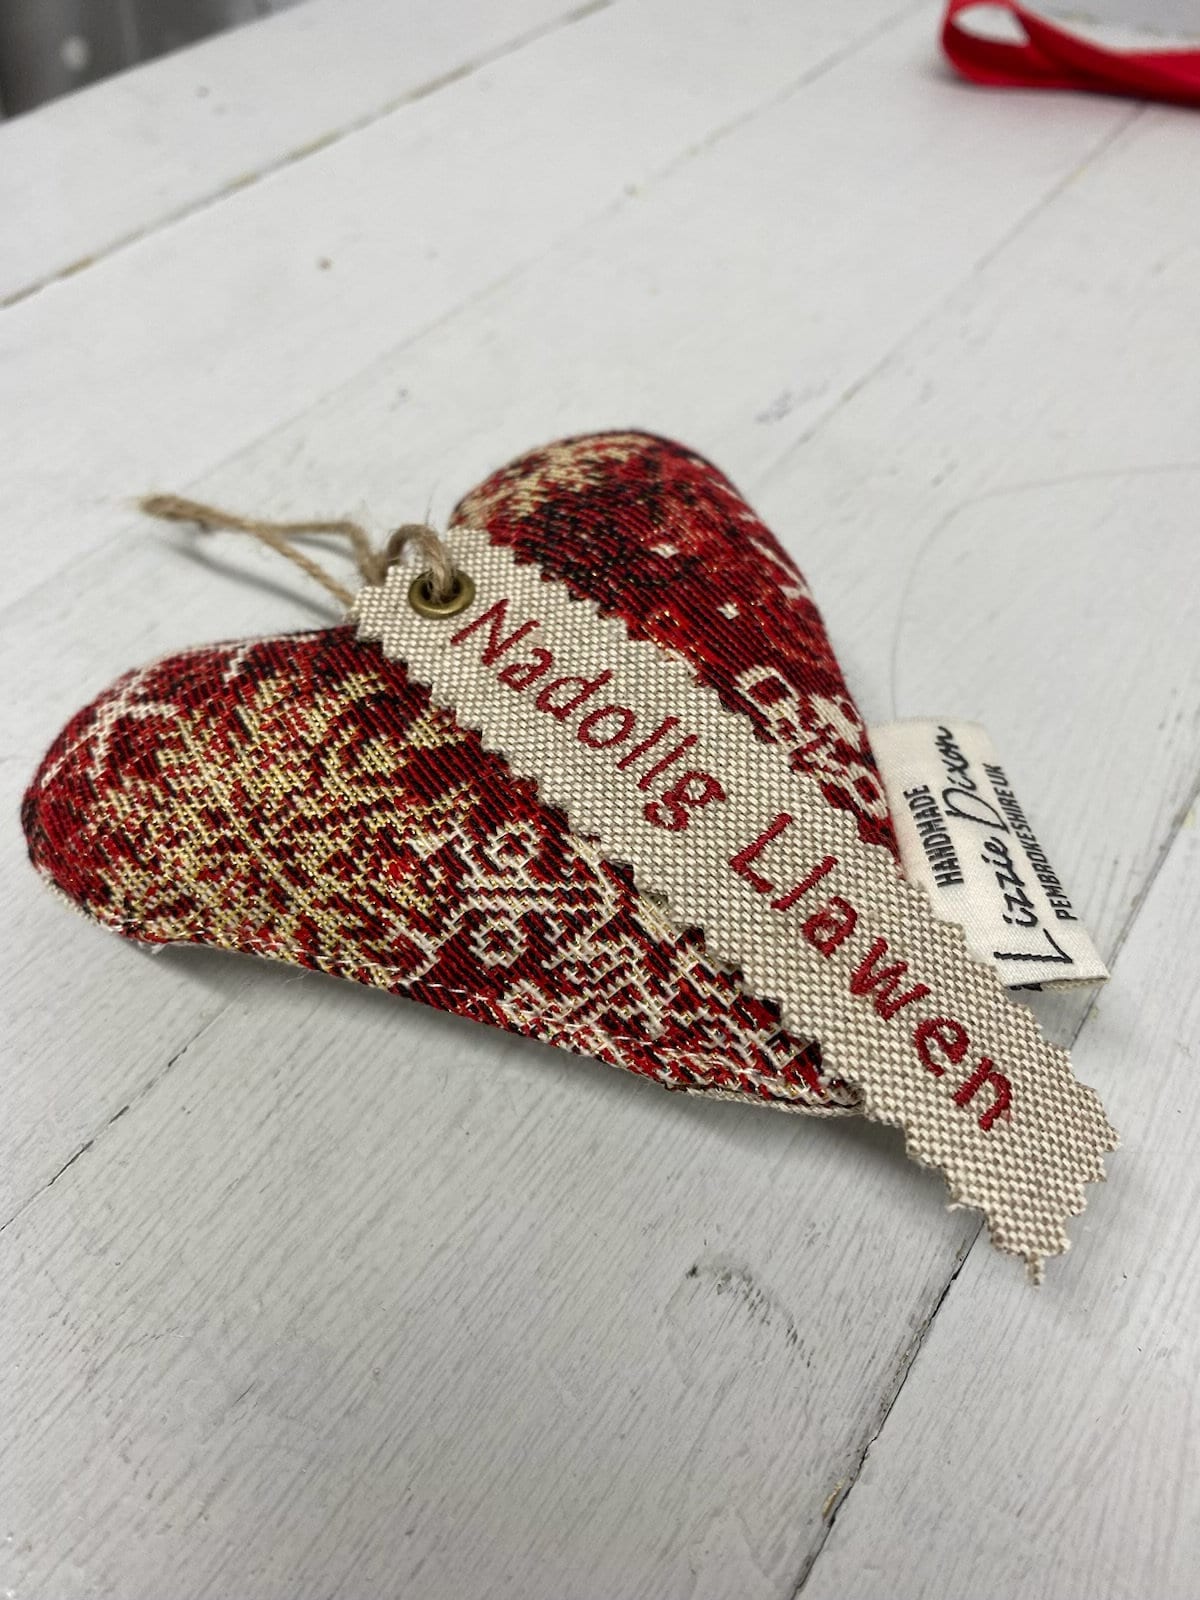 Nadolig Llawen Mini Christmas Heart .- Luxe Snowflake and Gold Tapestry fabricstyle Heart Nadolig Llawen Red Tag